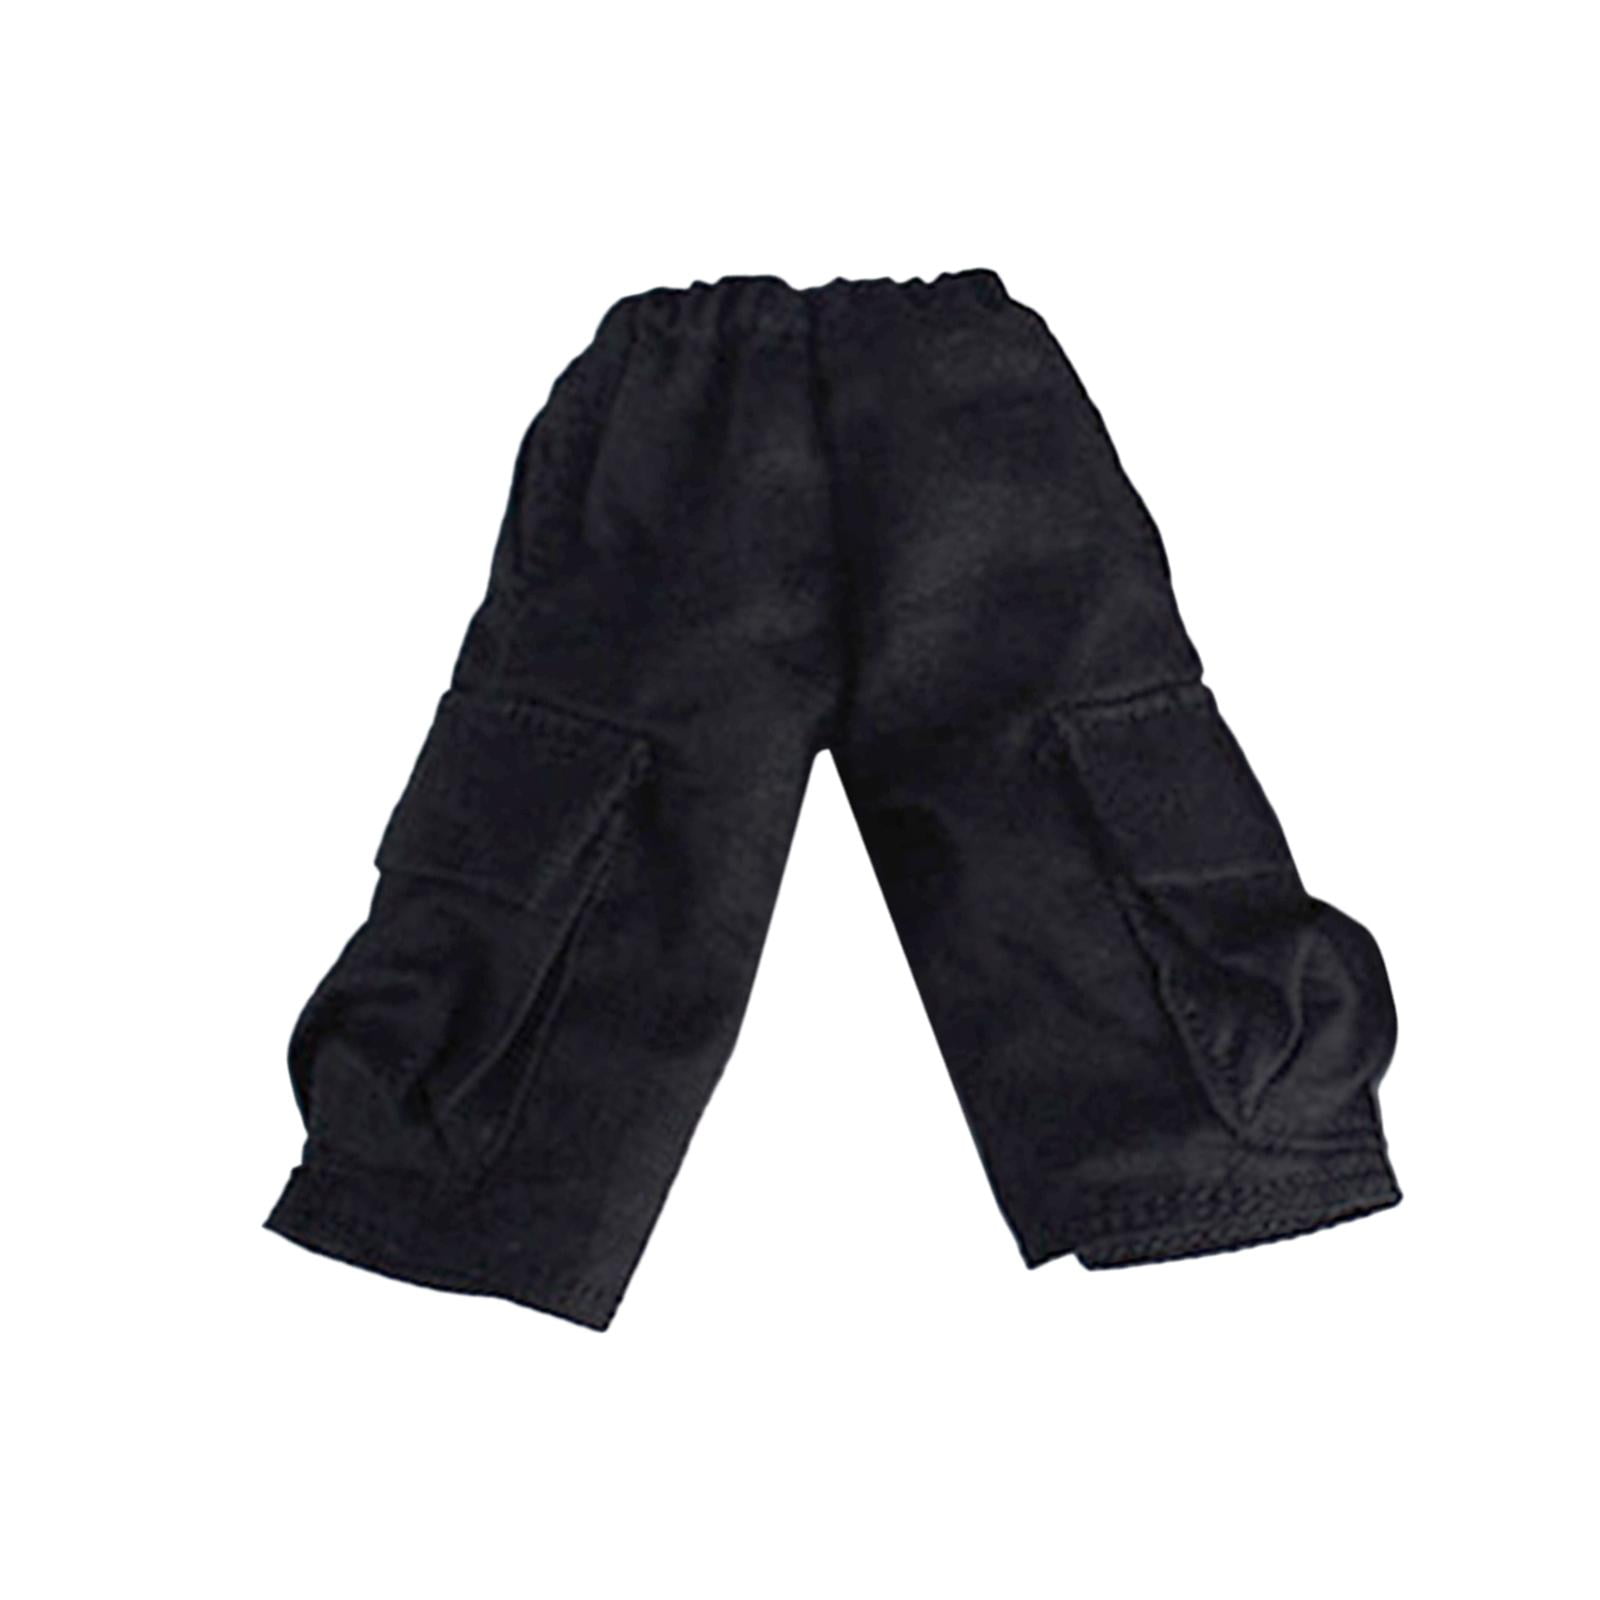 1/12 Scale Male Figure Cargo Pants for Figures Extra Black Pockets Action with Accessories Male 6inch